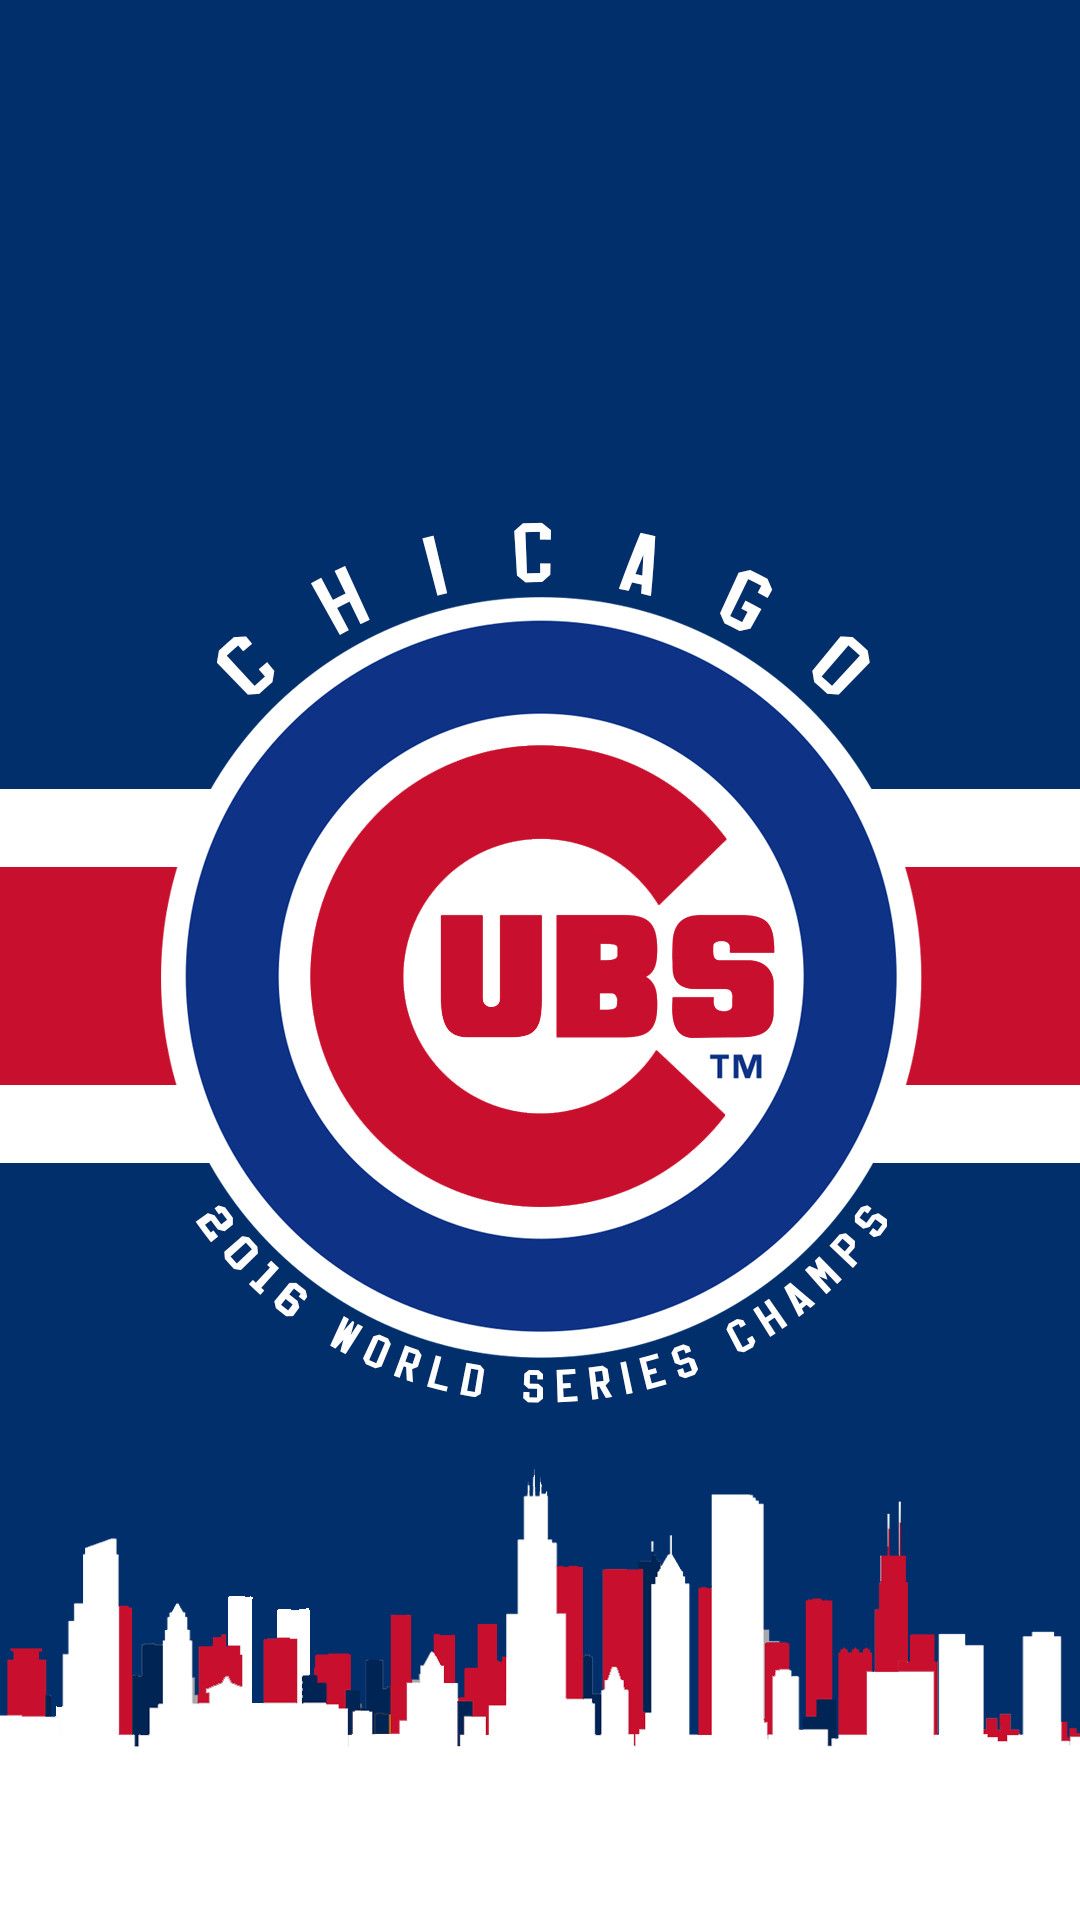 Chicago Cubs Wallpaper For Phones. Cubs wallpaper, Chicago cubs wallpaper, Chicago cubs